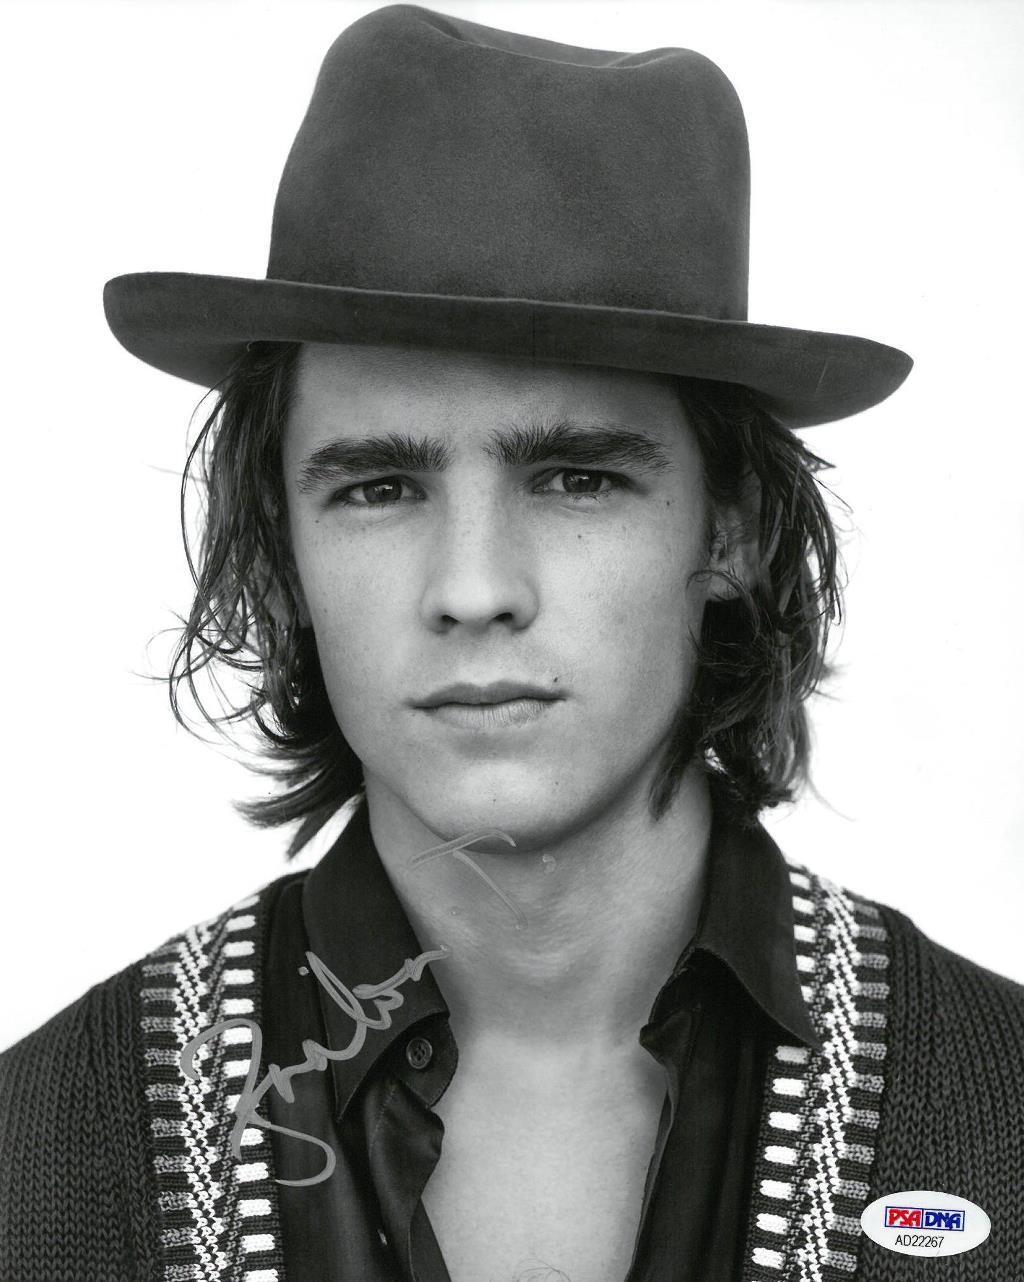 Brenton Thwaites Signed Authentic Autographed 8x10 B/W Photo Poster painting PSA/DNA #AD22267